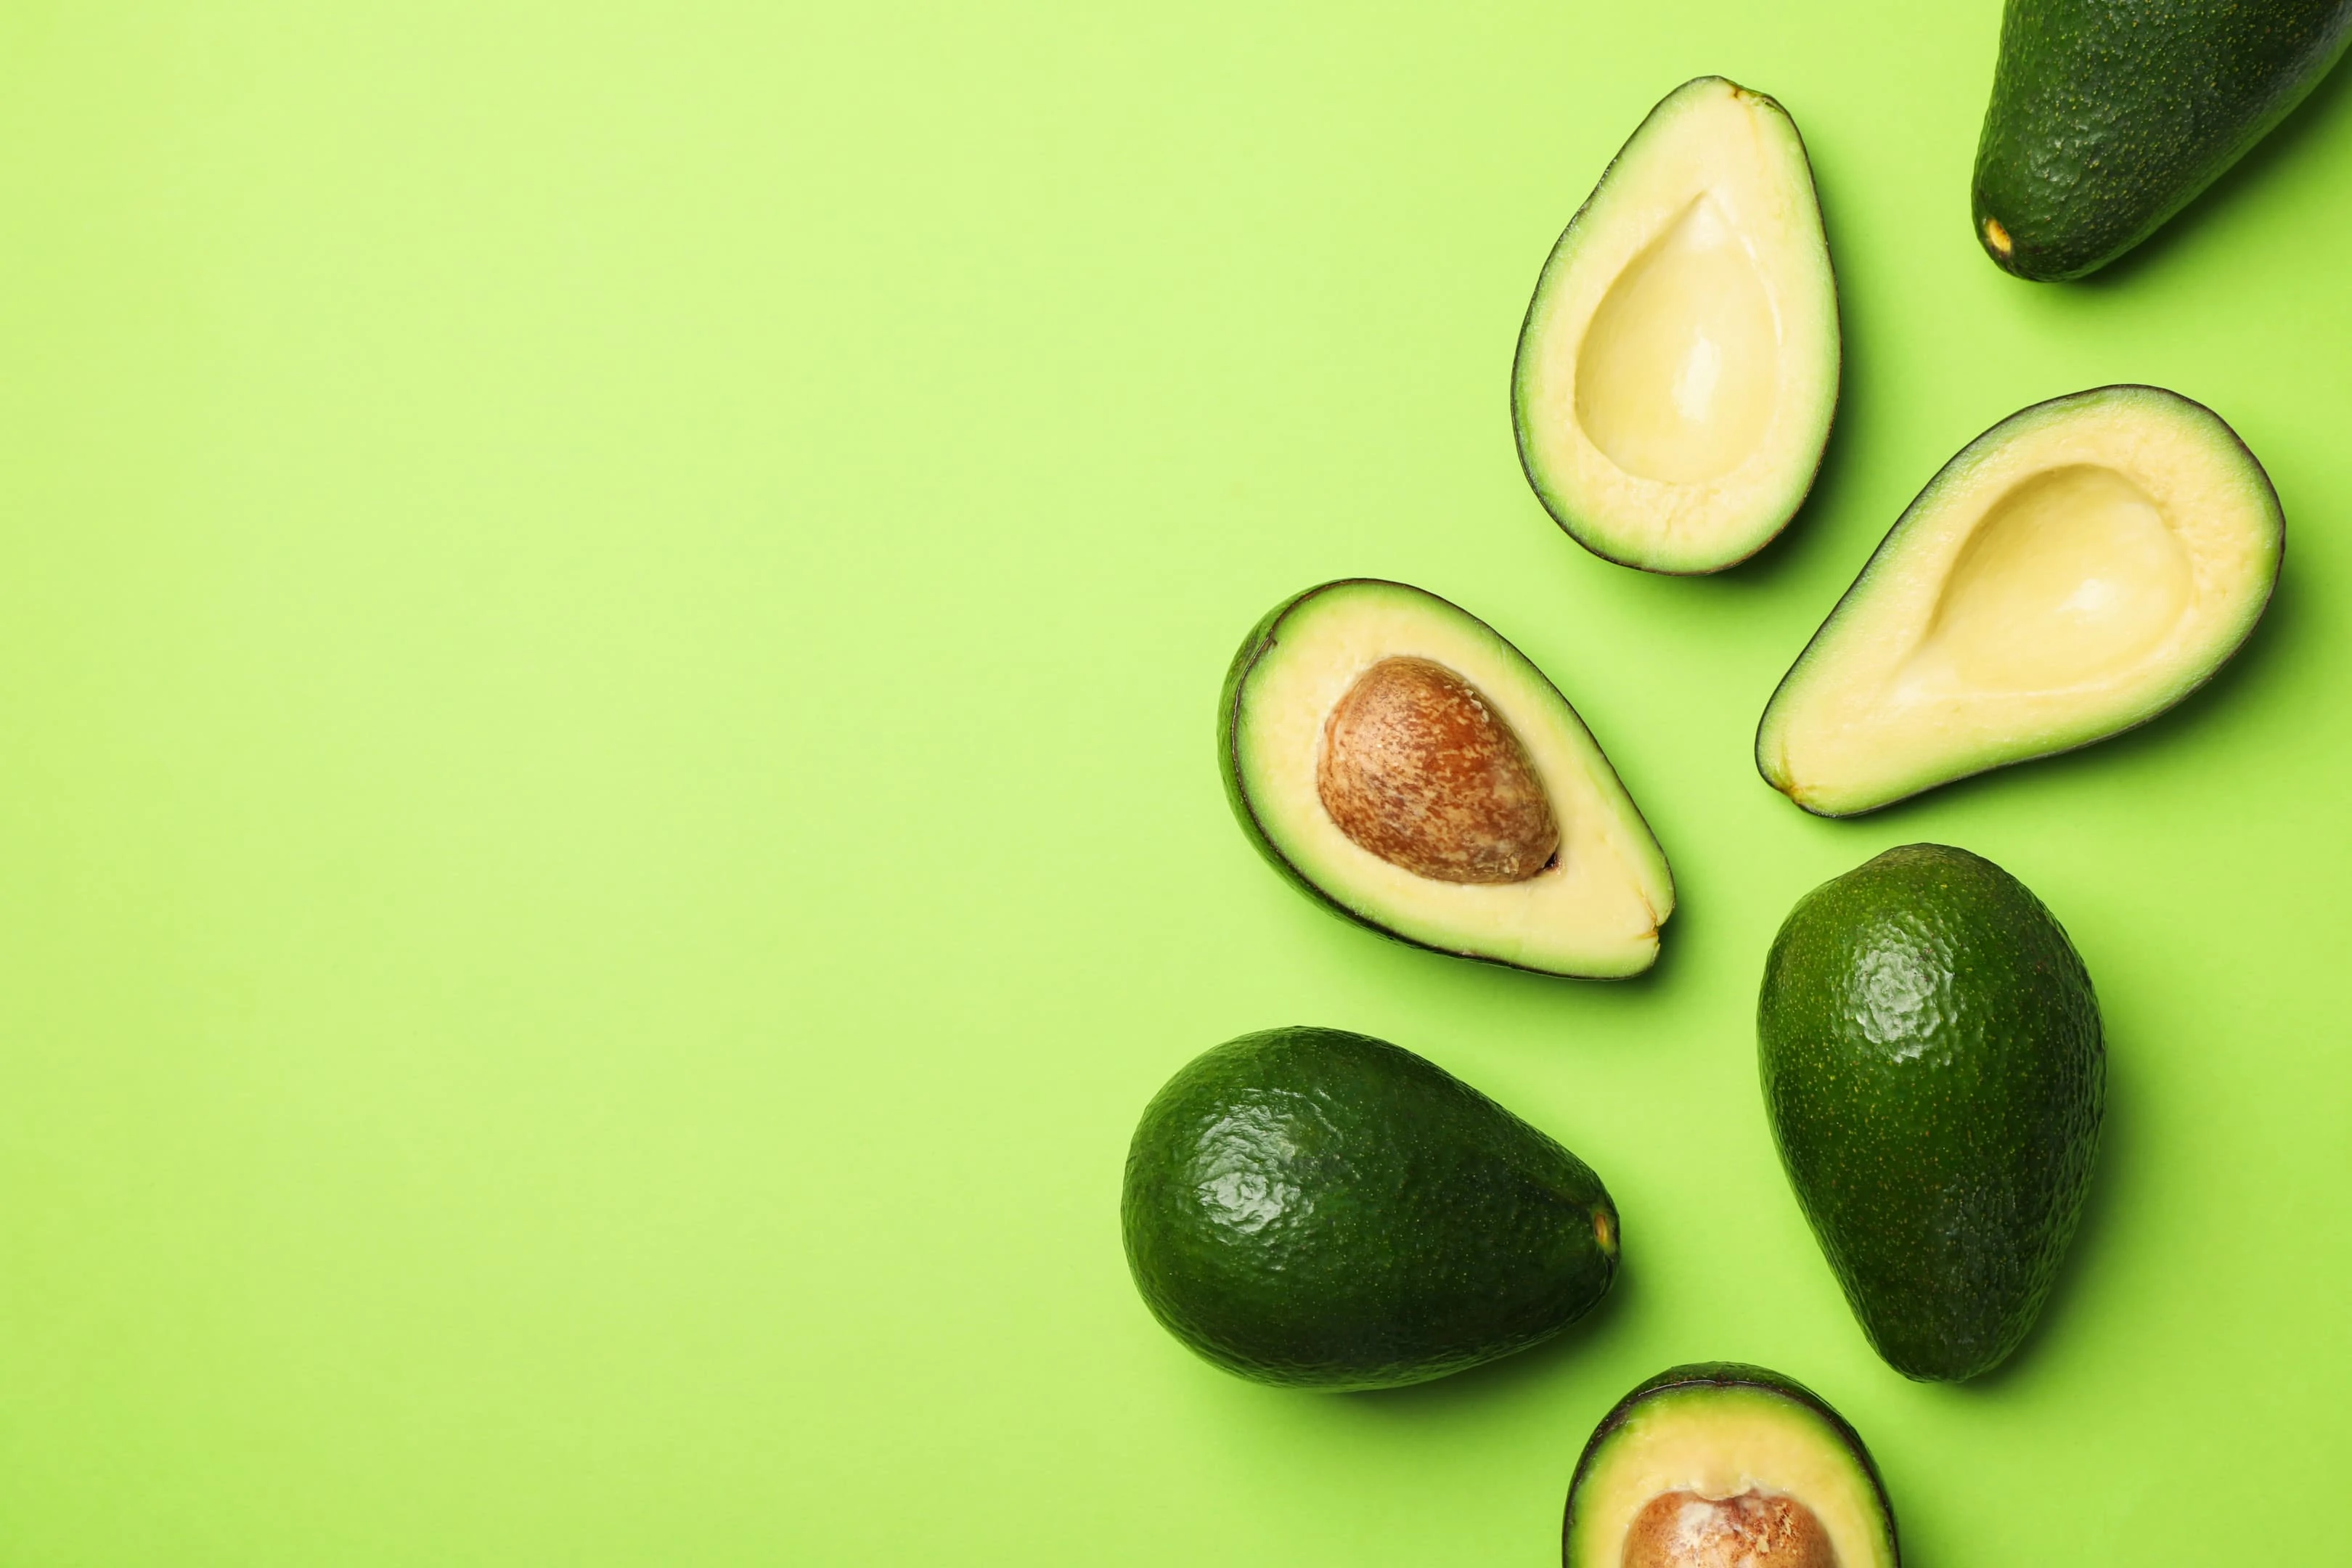 Avocados on green background